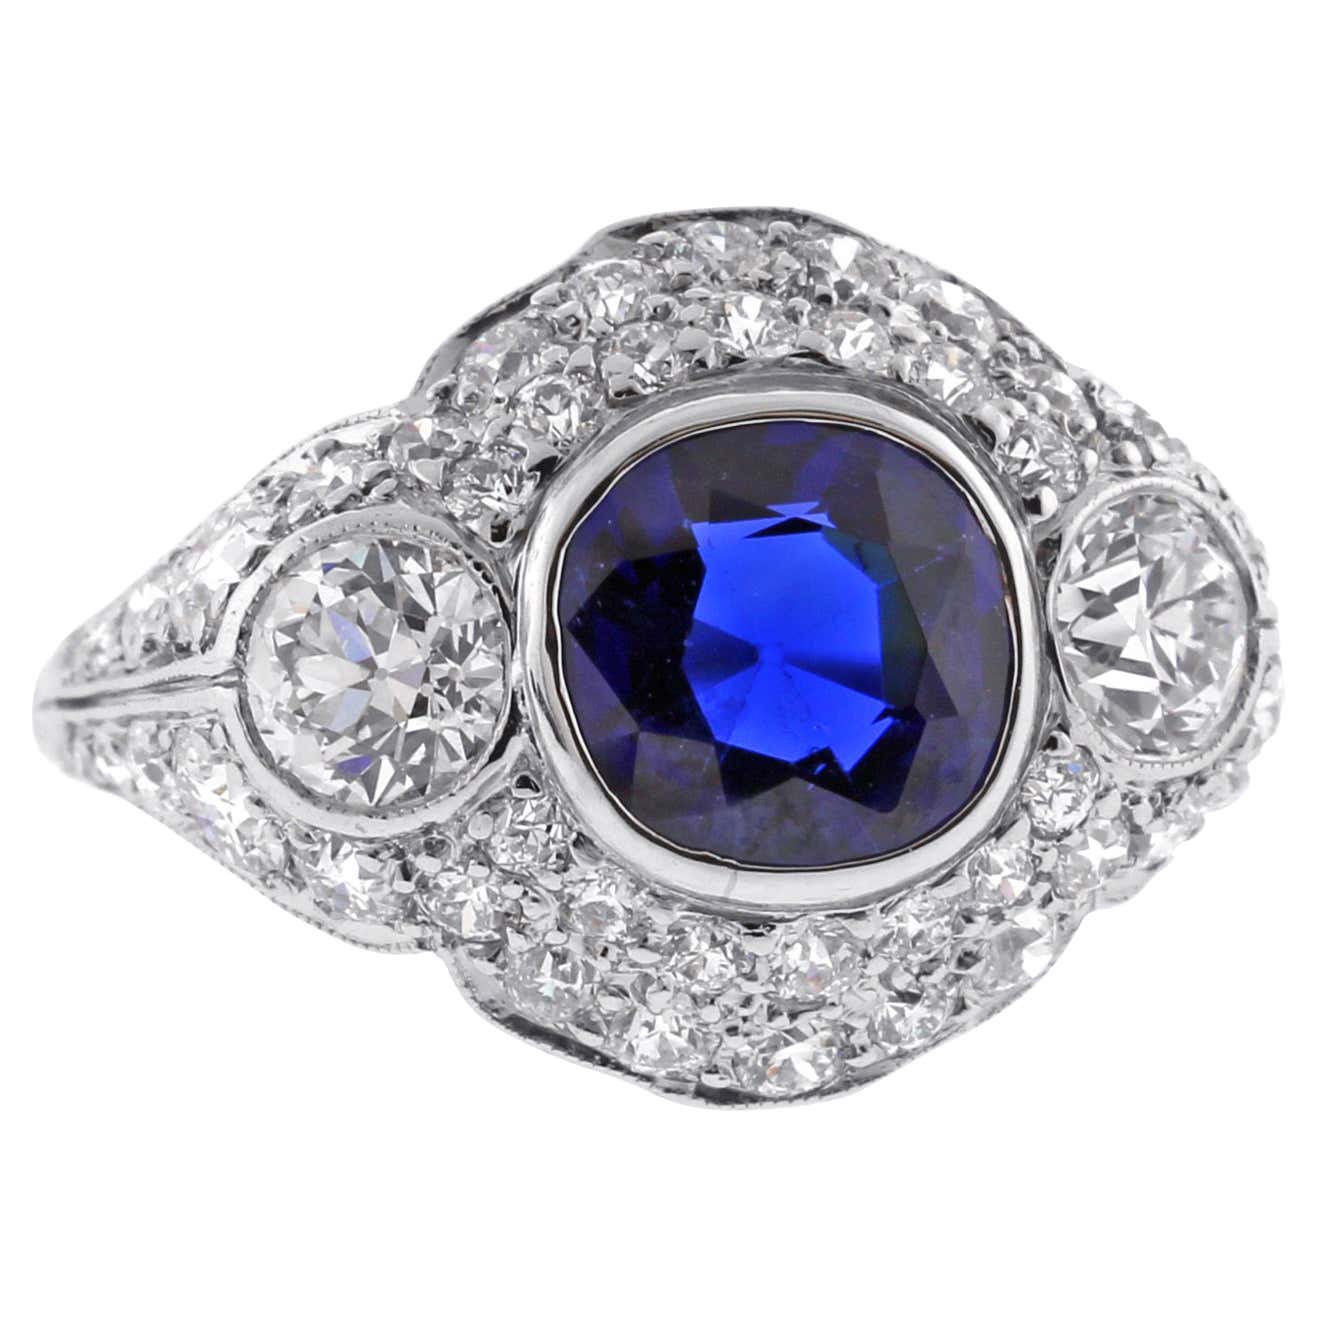 Tiffany & Co. Art Deco A.G.L Certified Sapphire and Diamond Ring ...